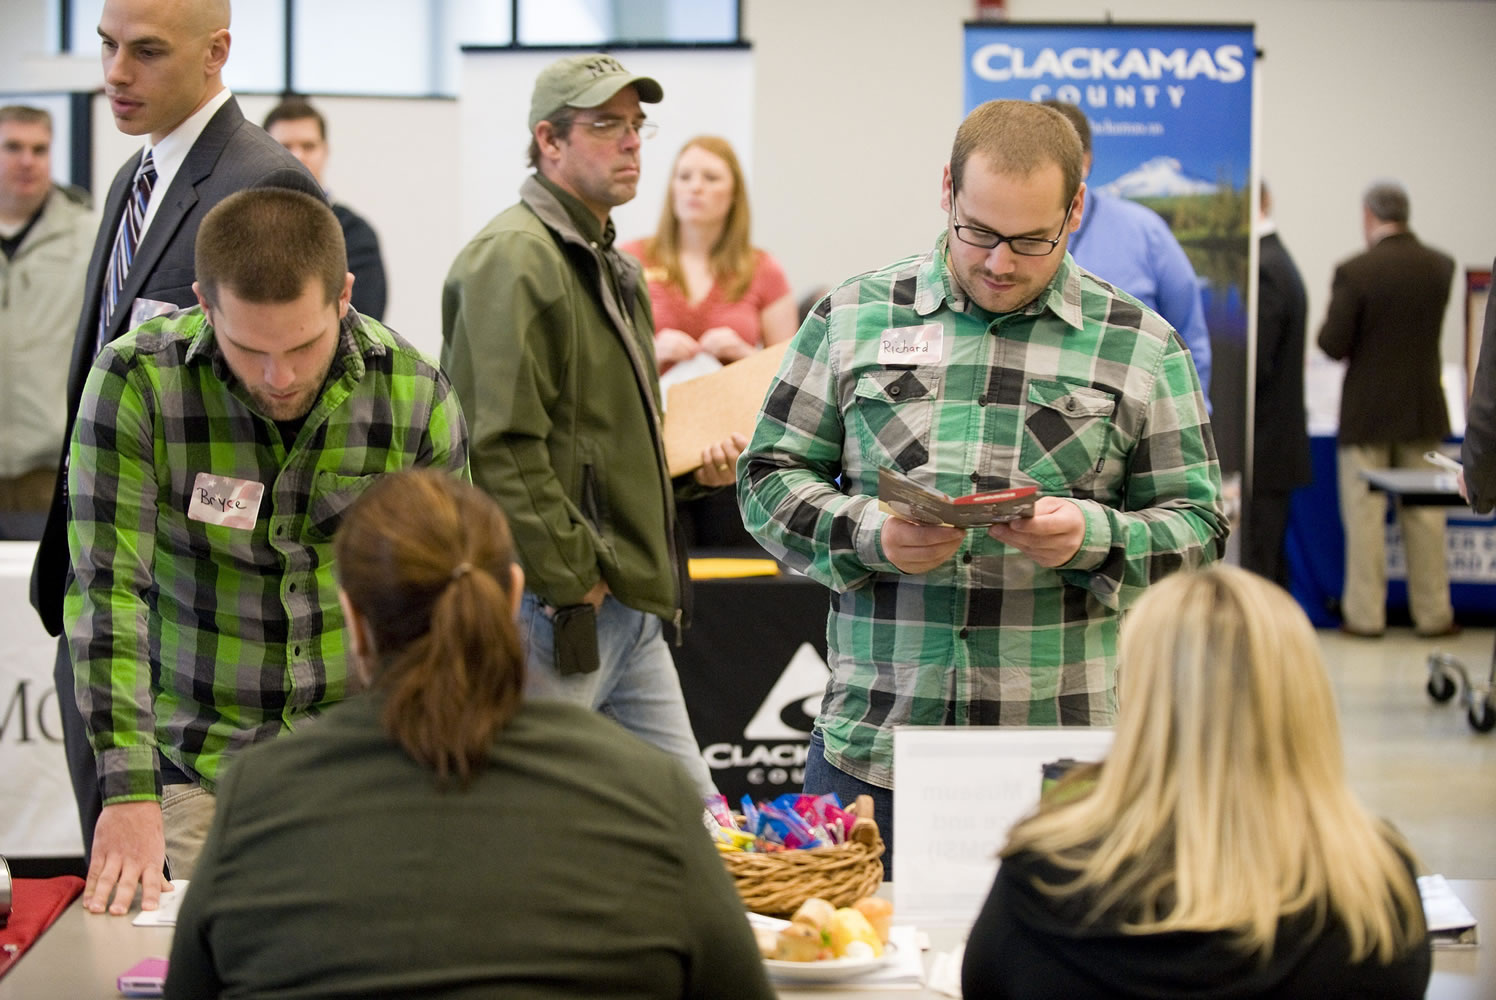 Army veterans Bryce Sanman, 24, left, and Richard Sheldon, 23, talk about job opportunities at OMSI at Thursday's job fair. Sanman and Sheldon served in Iraq together.